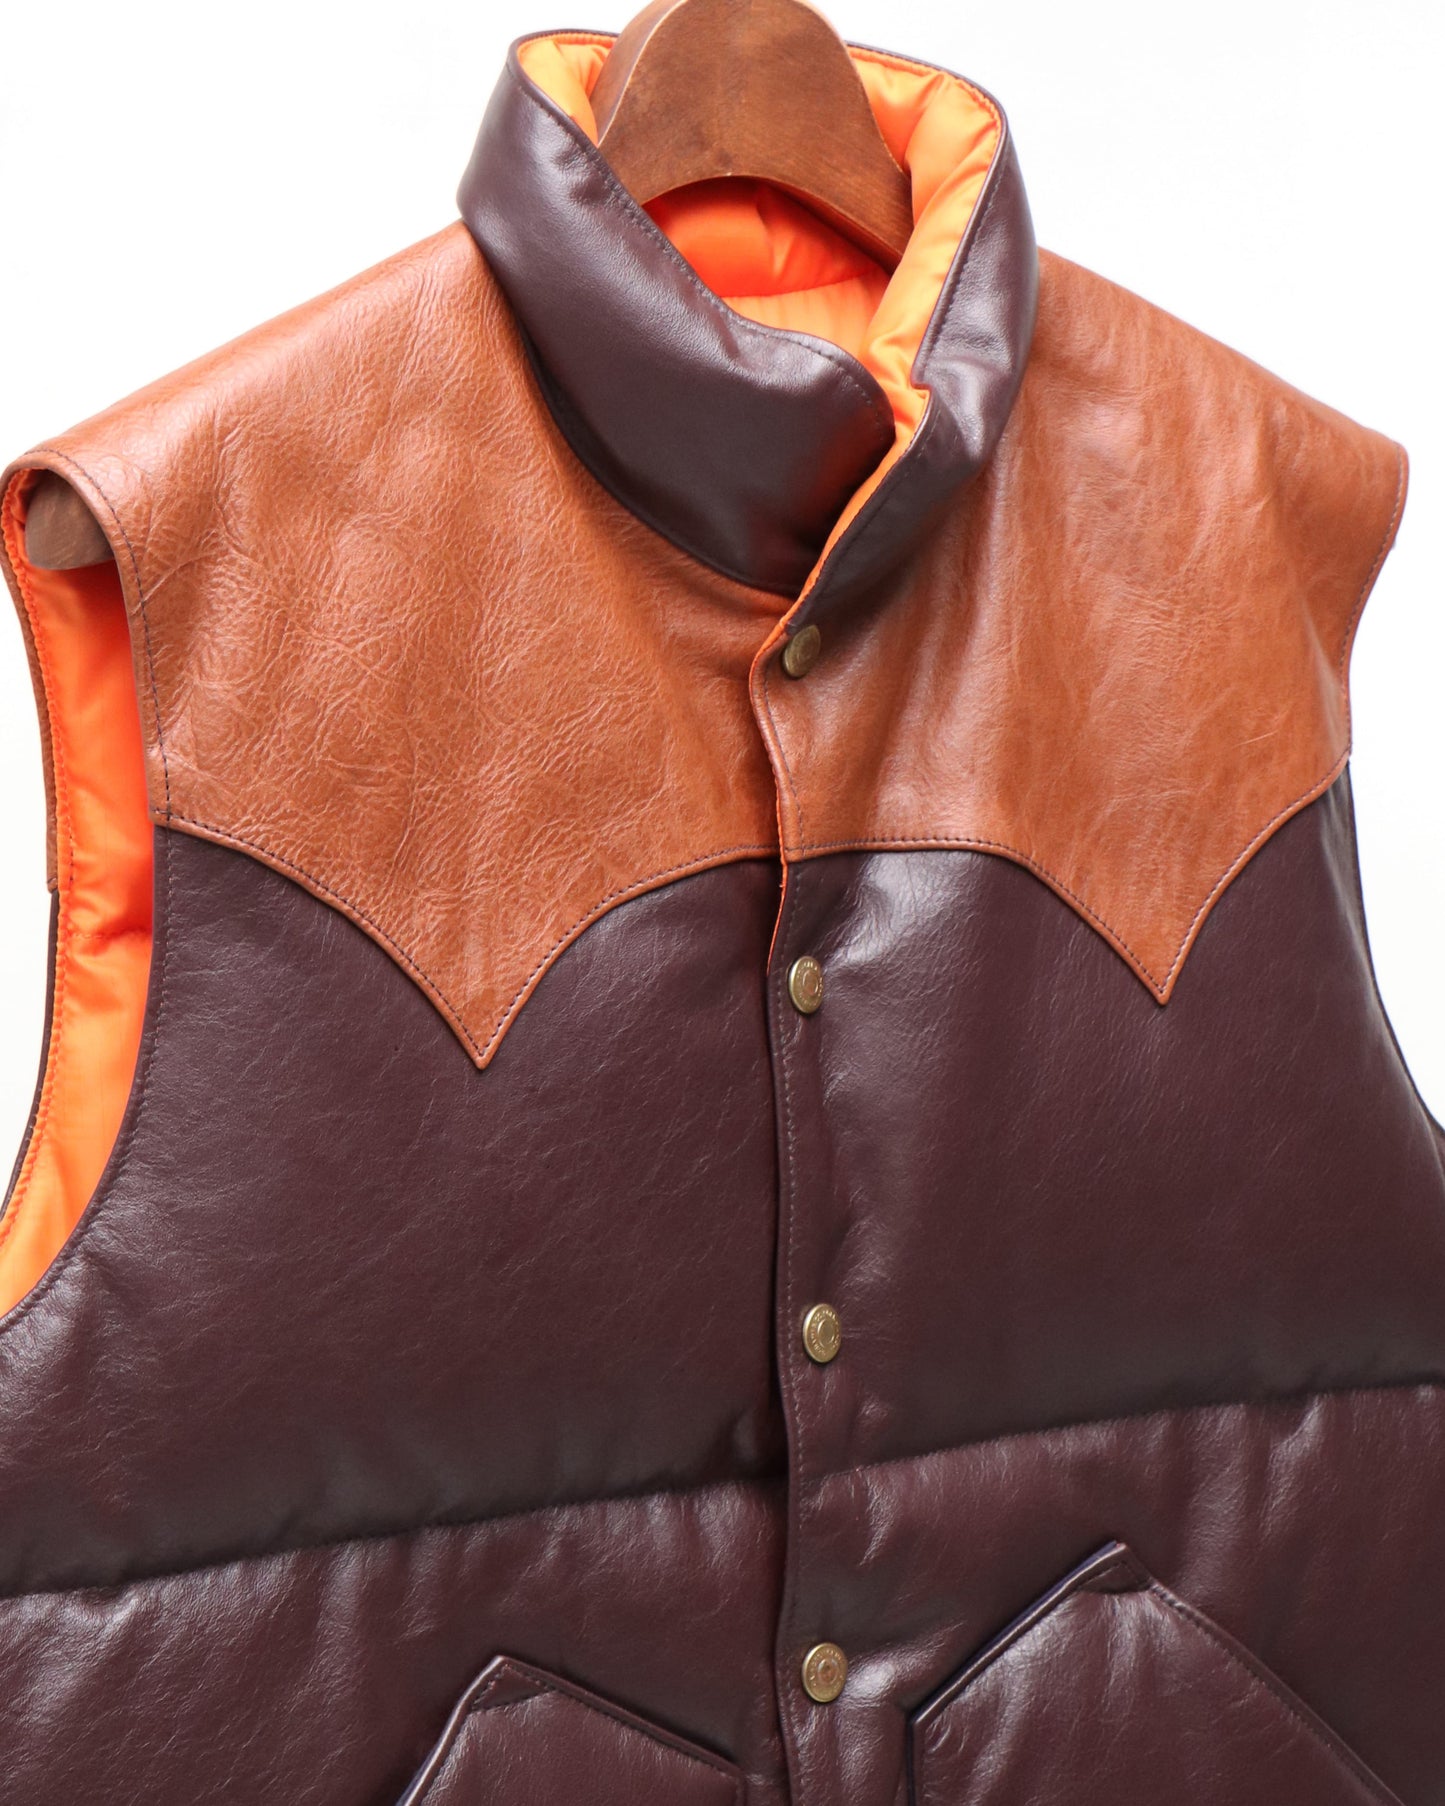 ALL LEATHER DOWN VEST